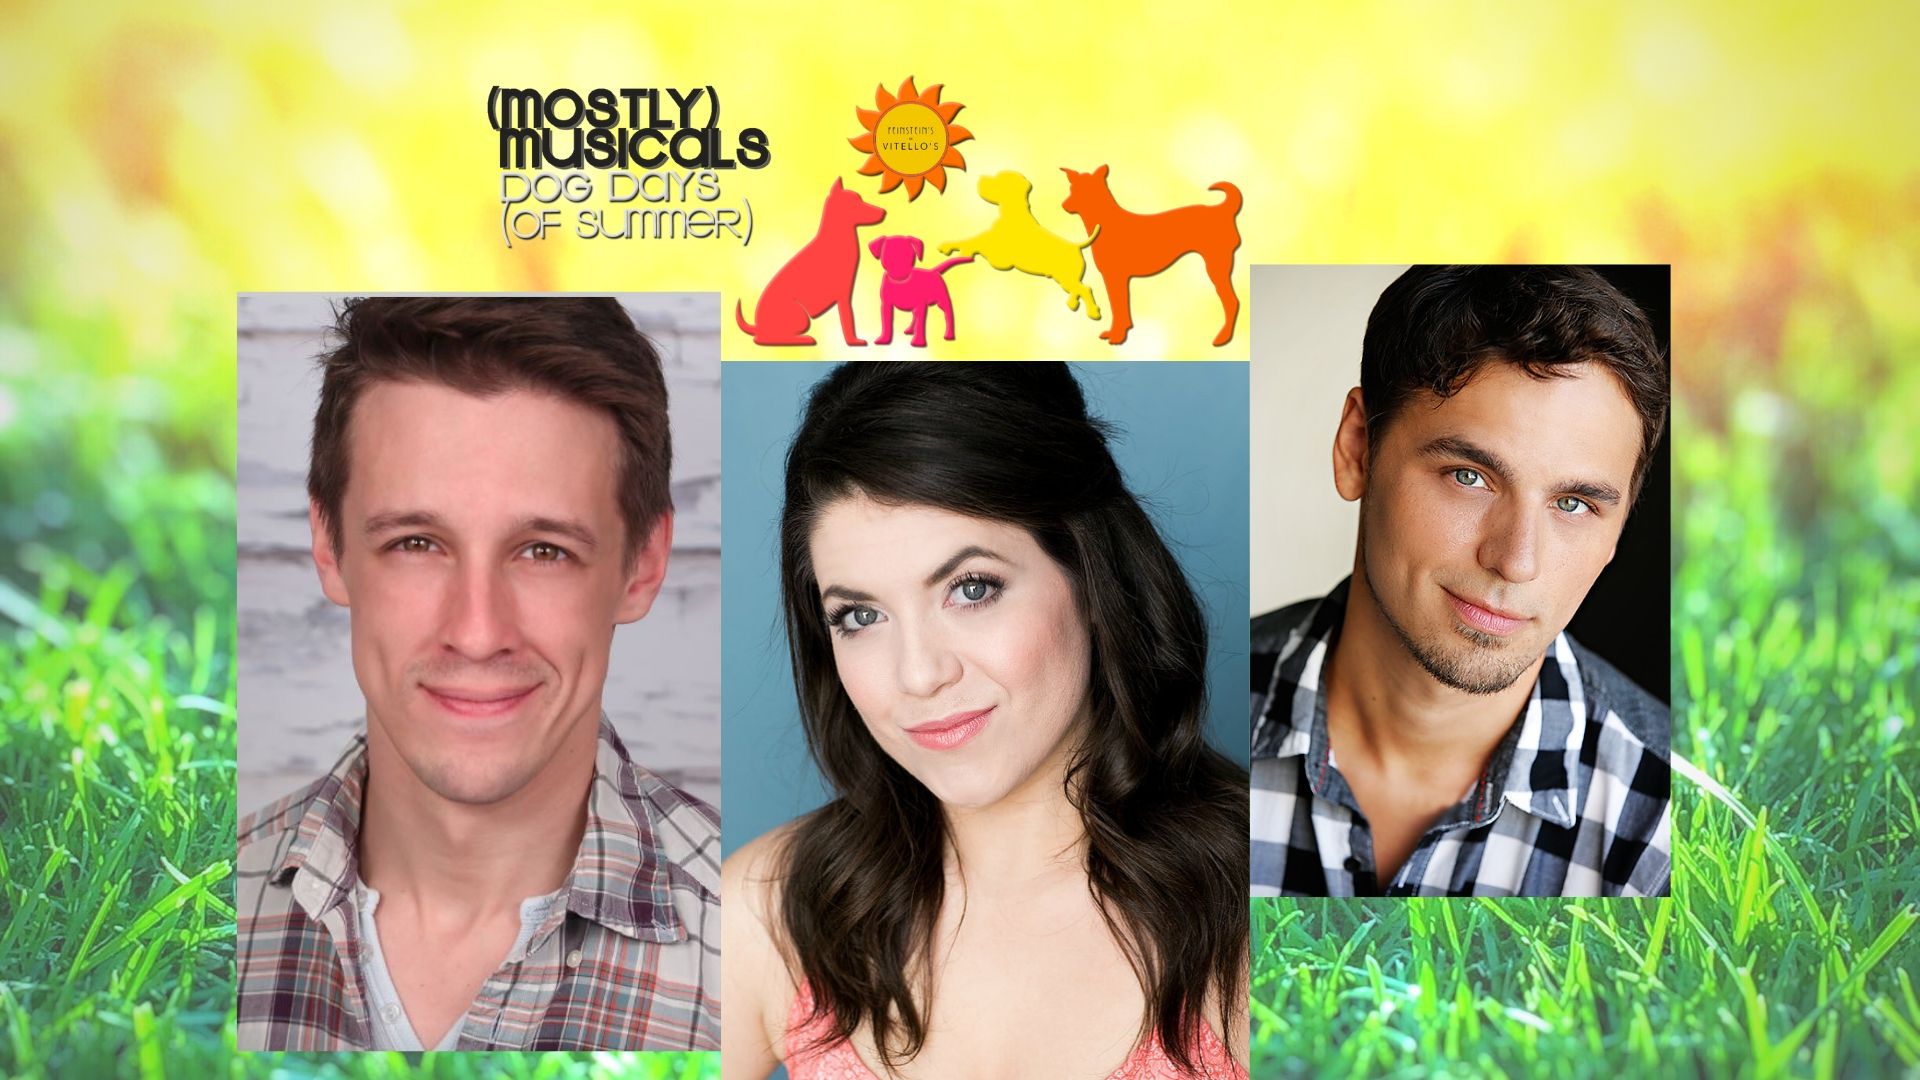 The cast of (mostly)musicals 34: DOG DAYS of Summer 3